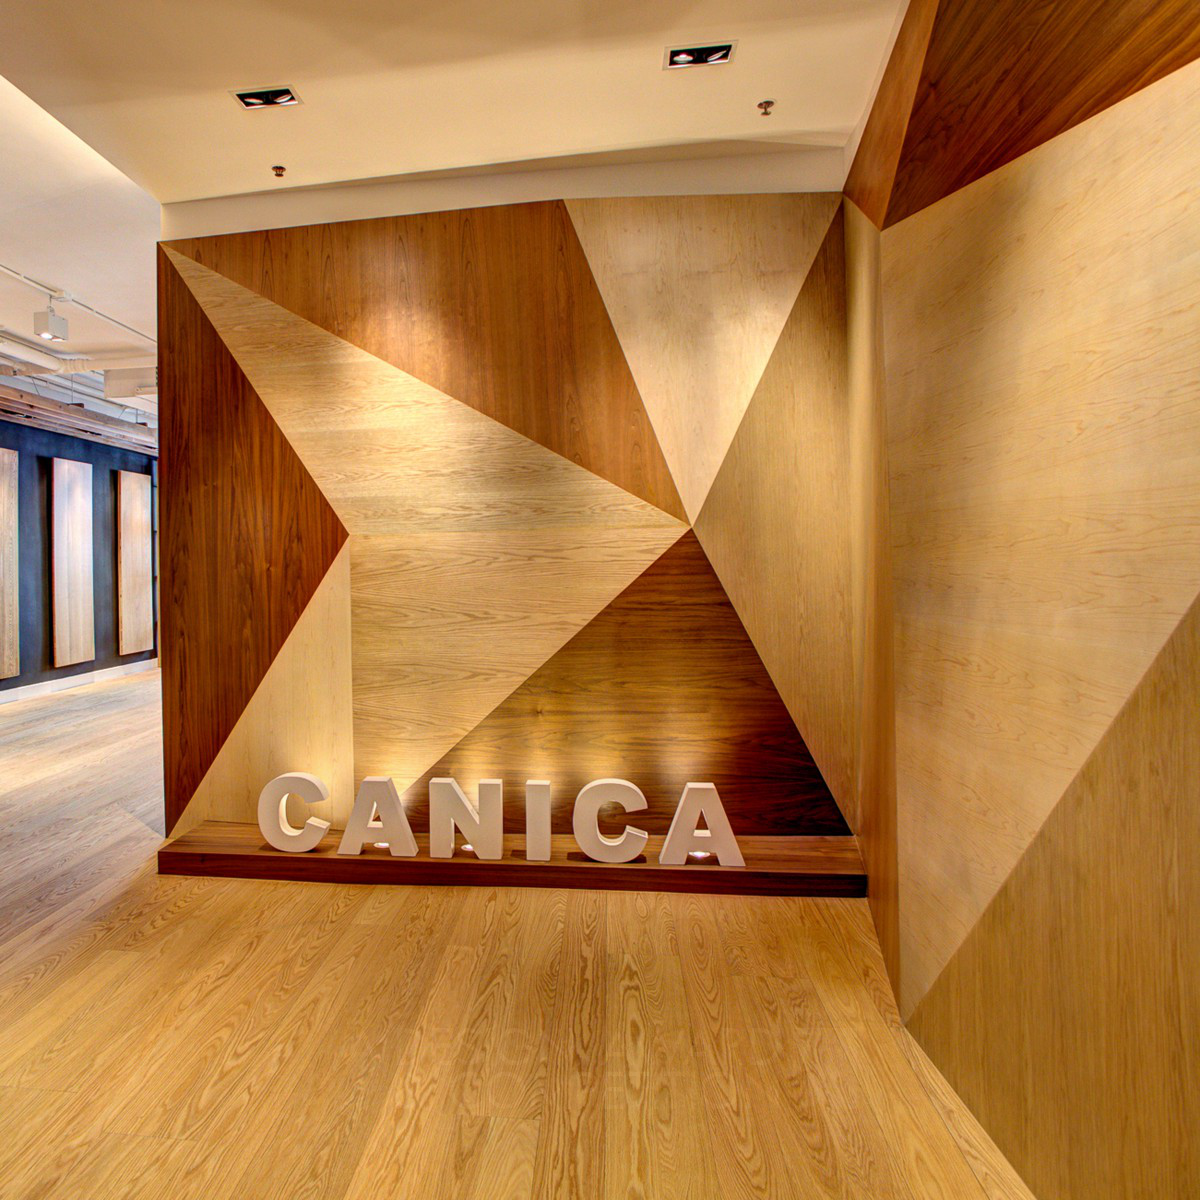 CANICA Retail / Office by LOUIS LAU